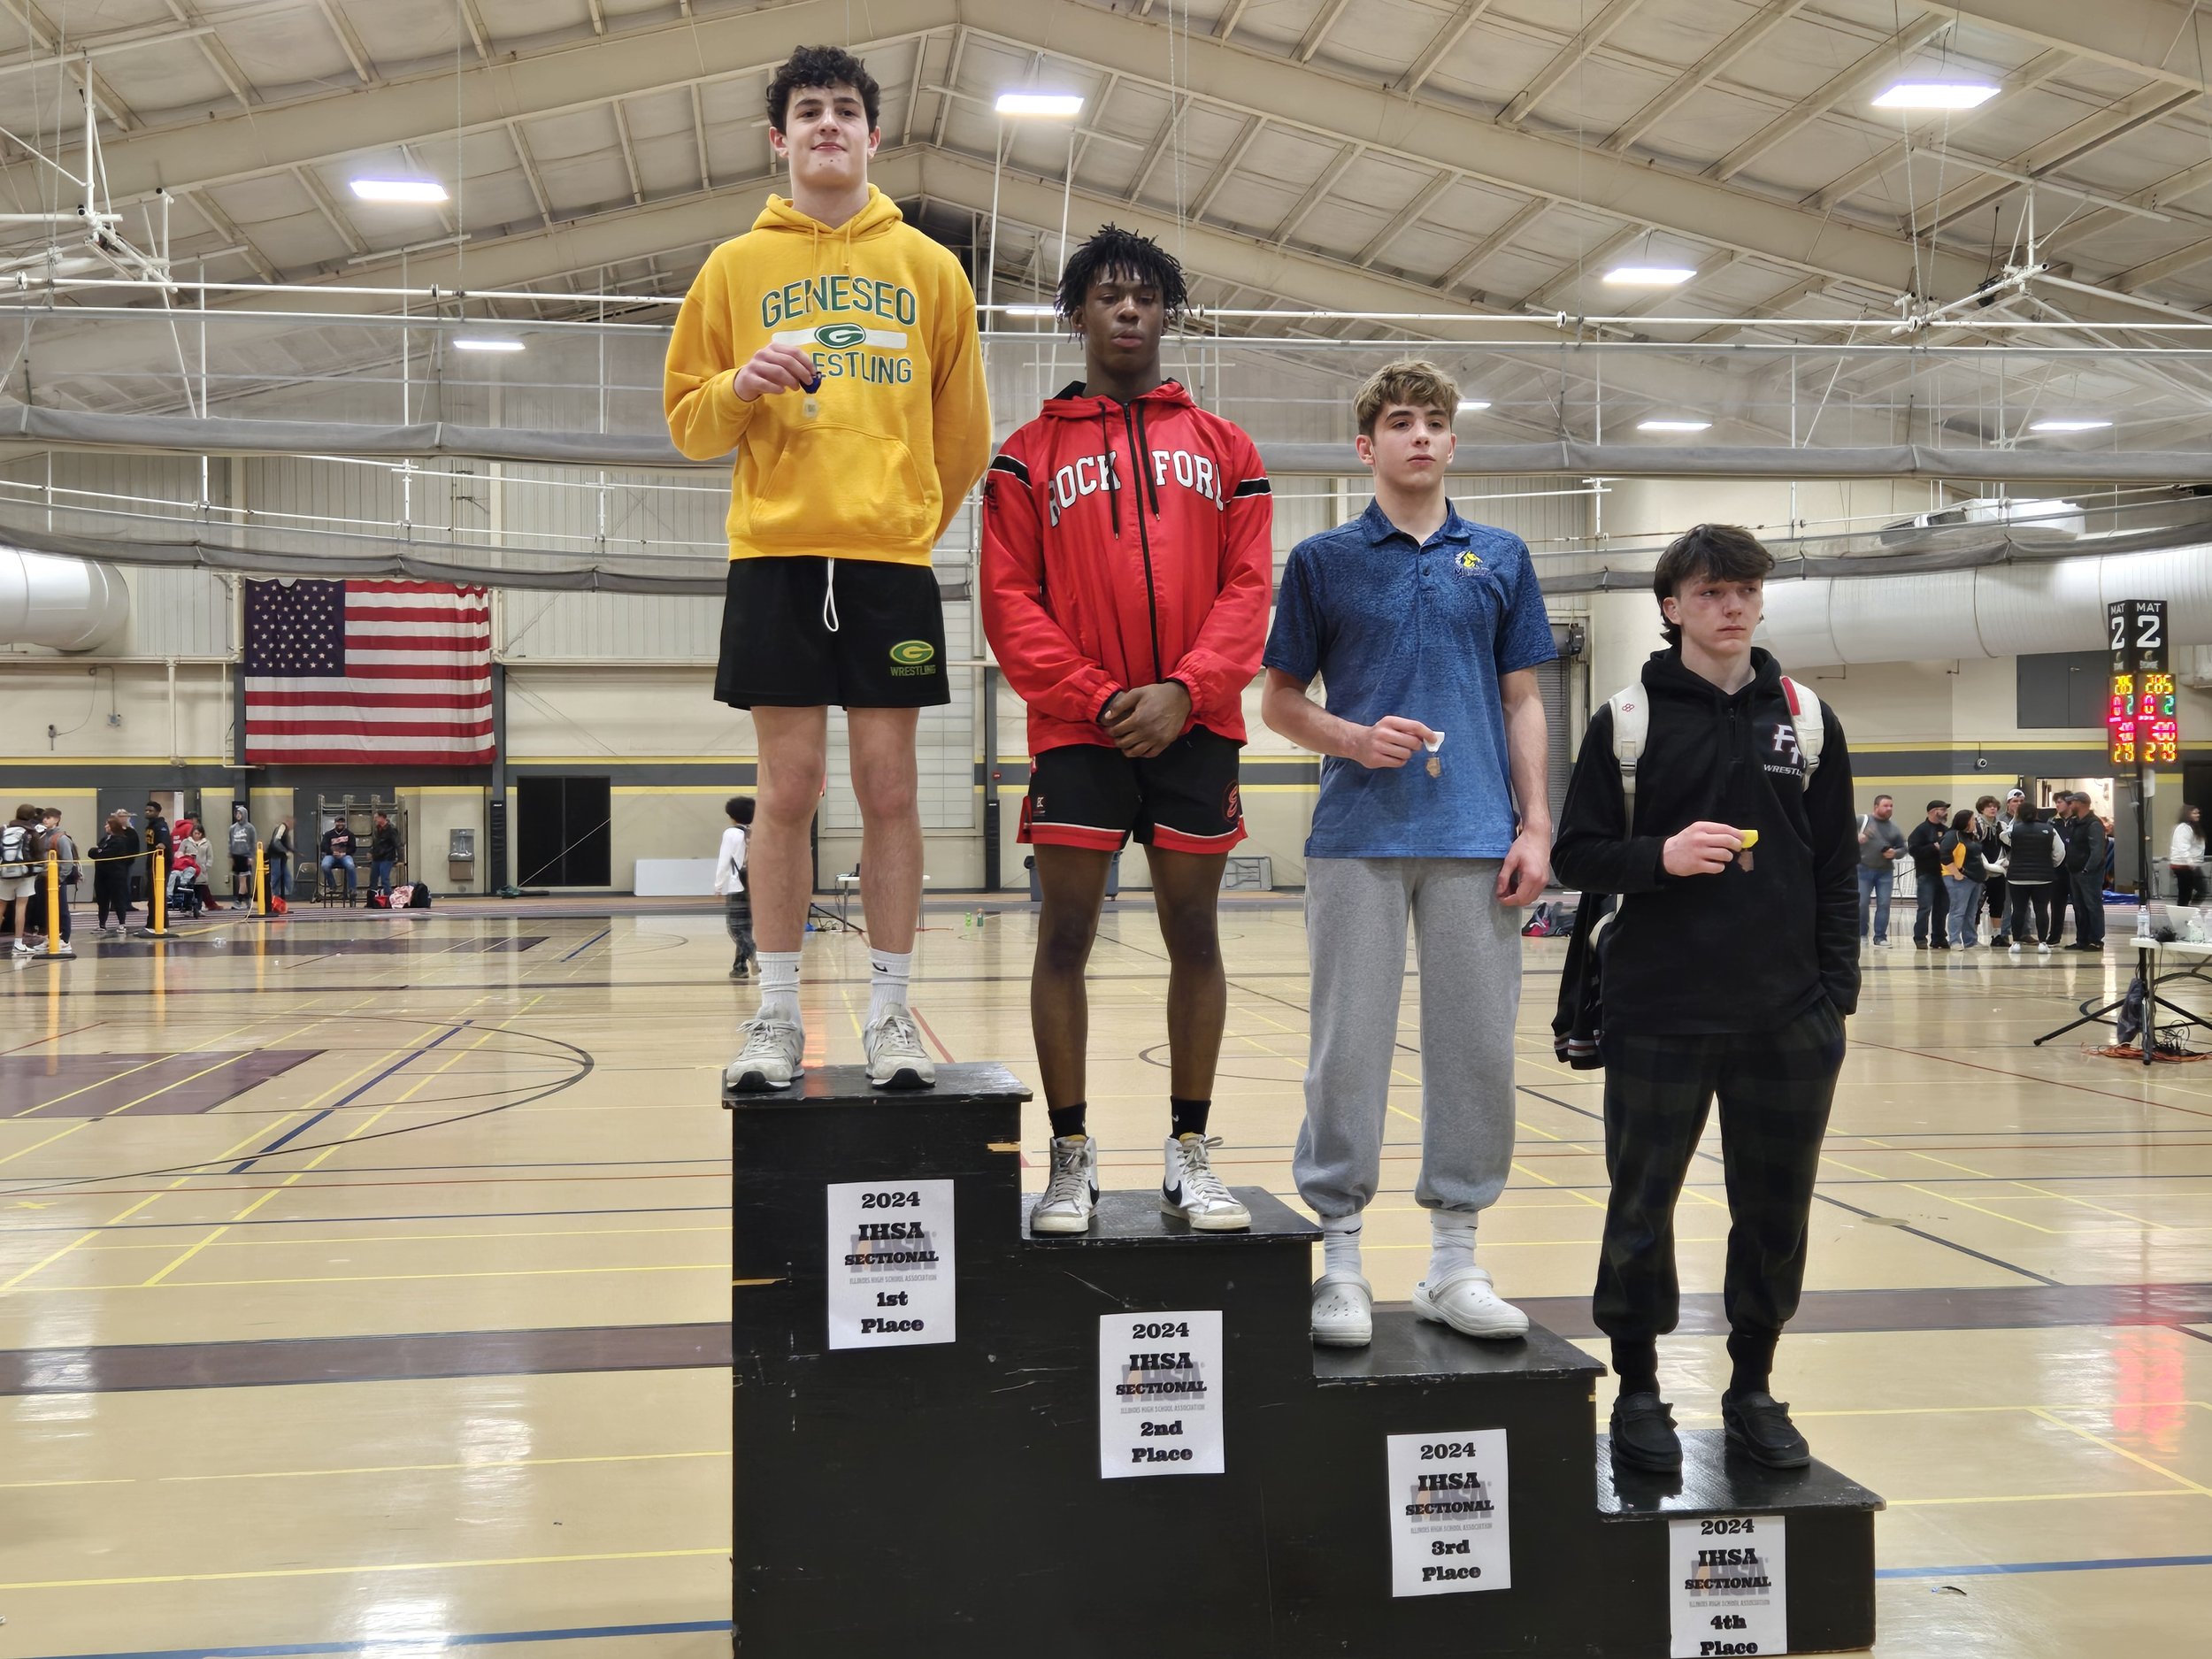 Kye Weinzierl (1st Place)